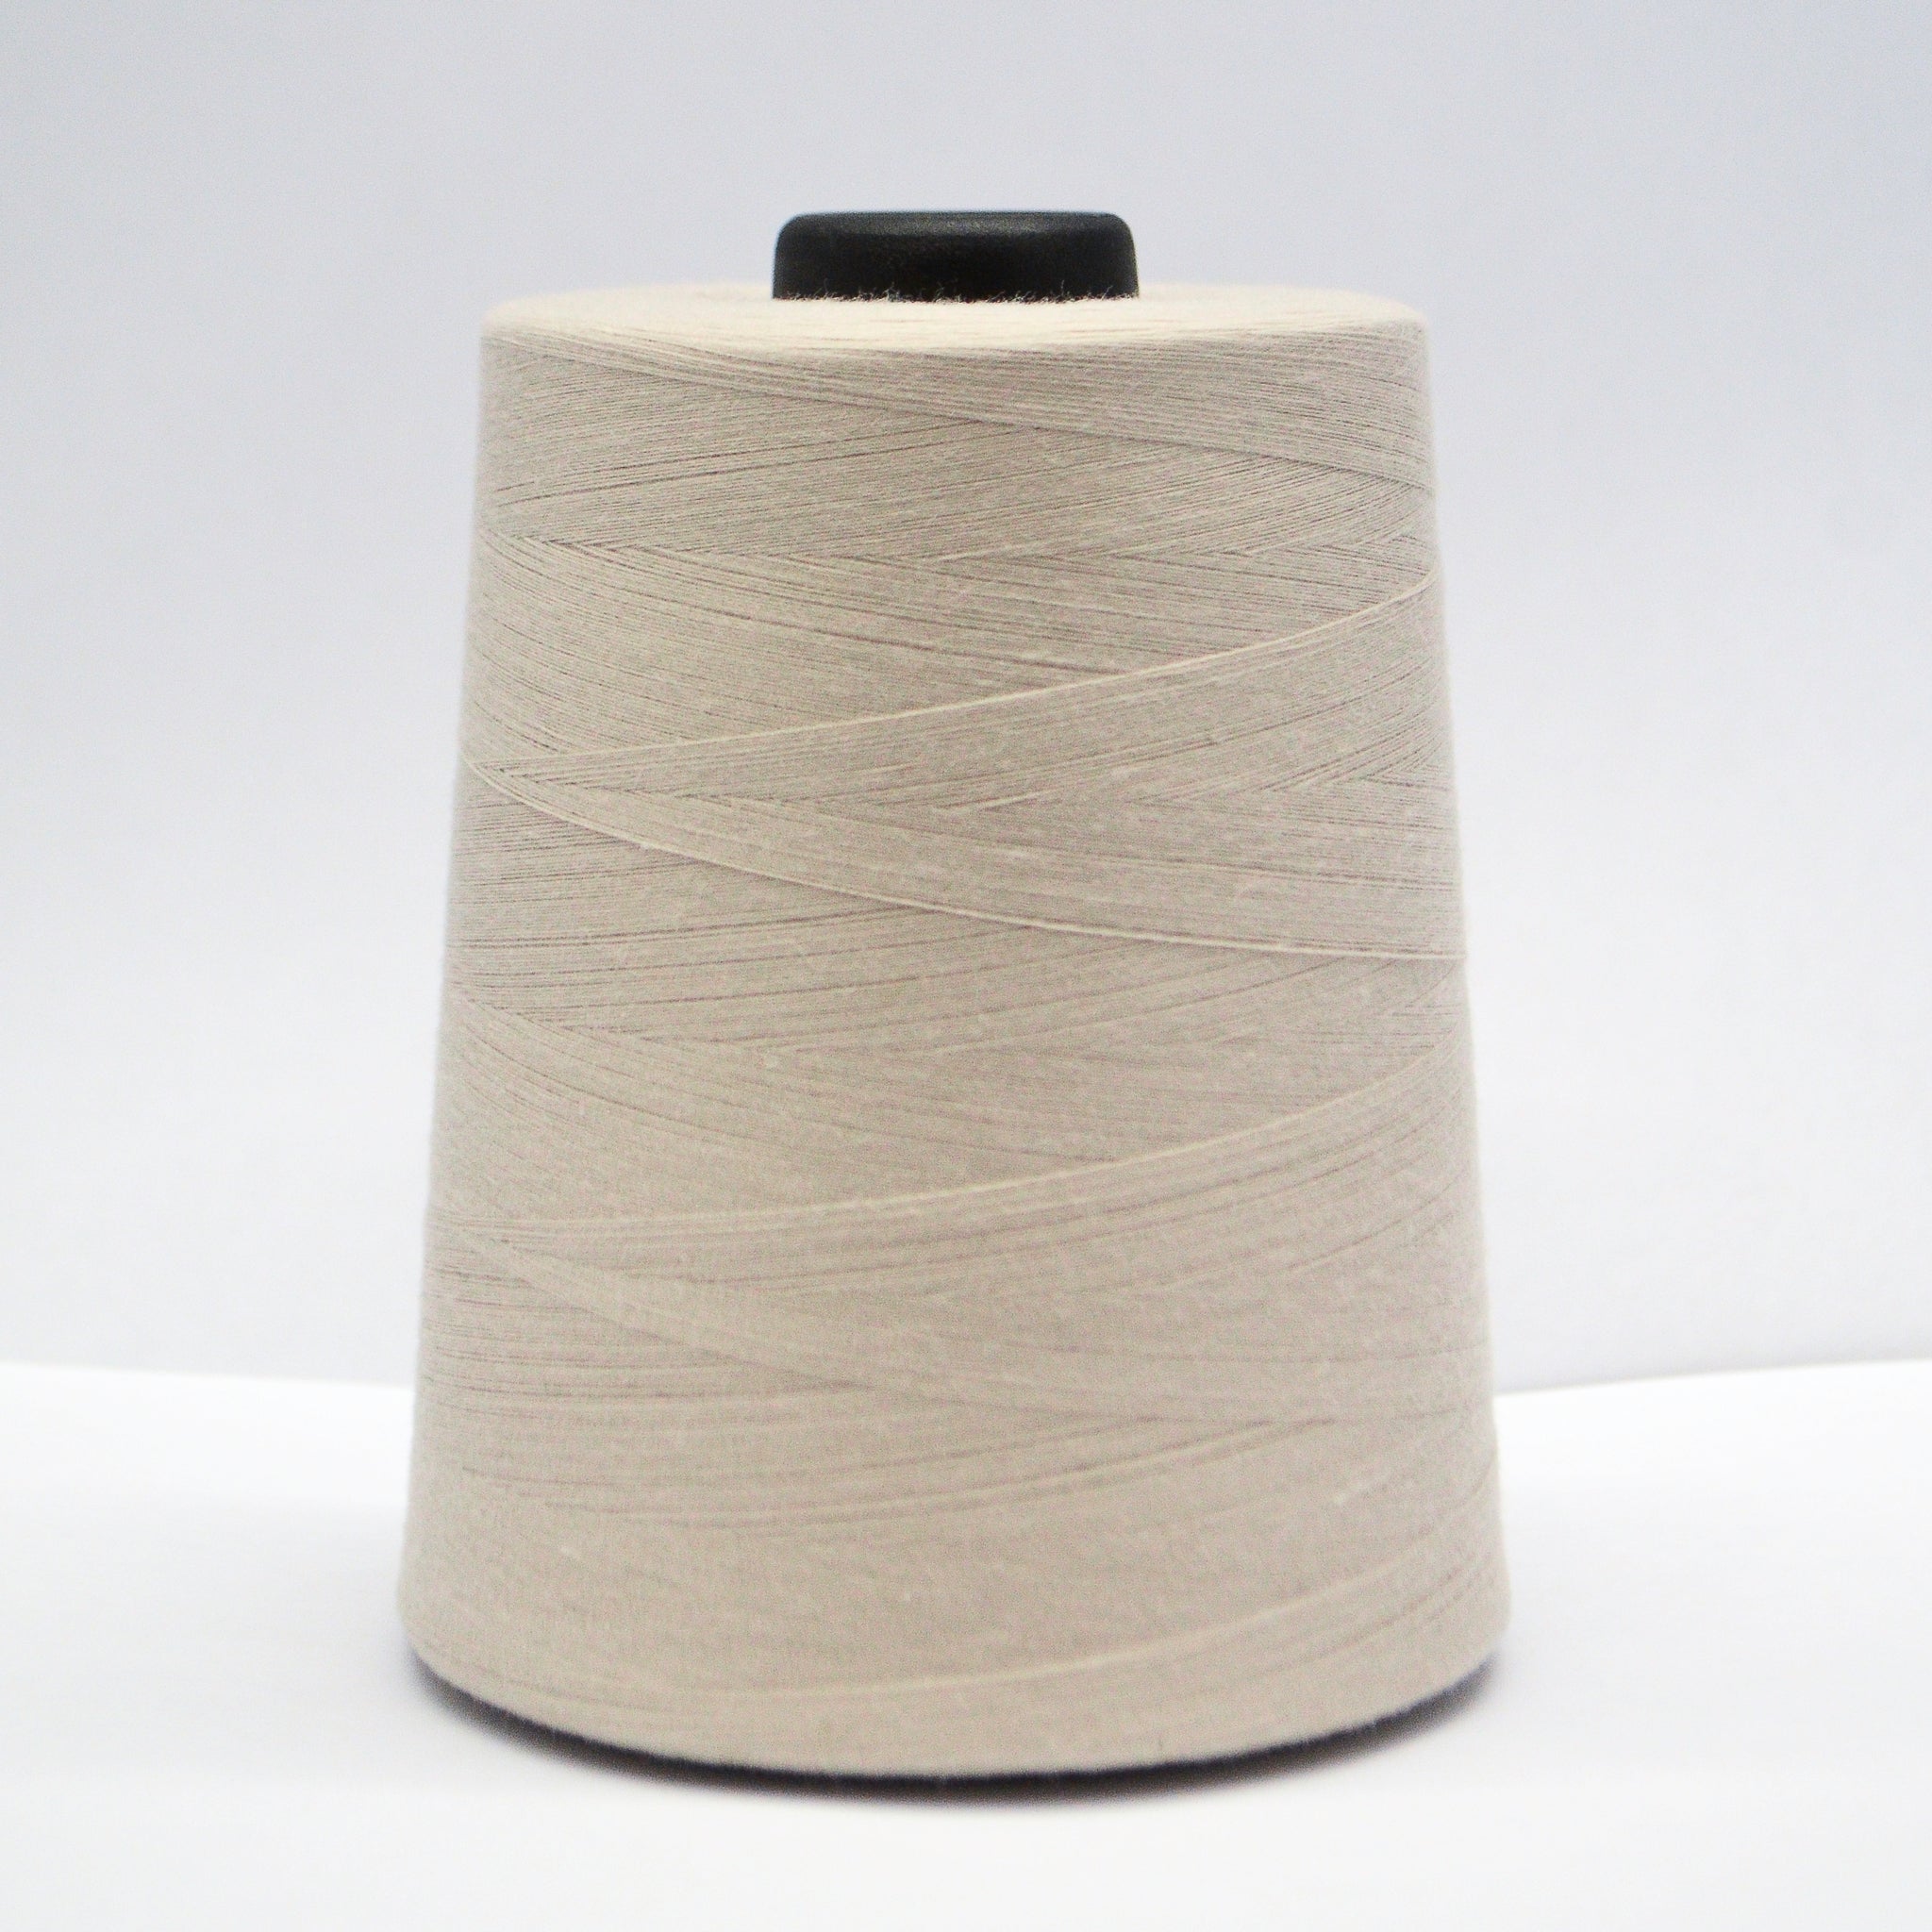 100% Polyester Tex 27 Sewing Thread 10,000 Yards - Light Beige #5010